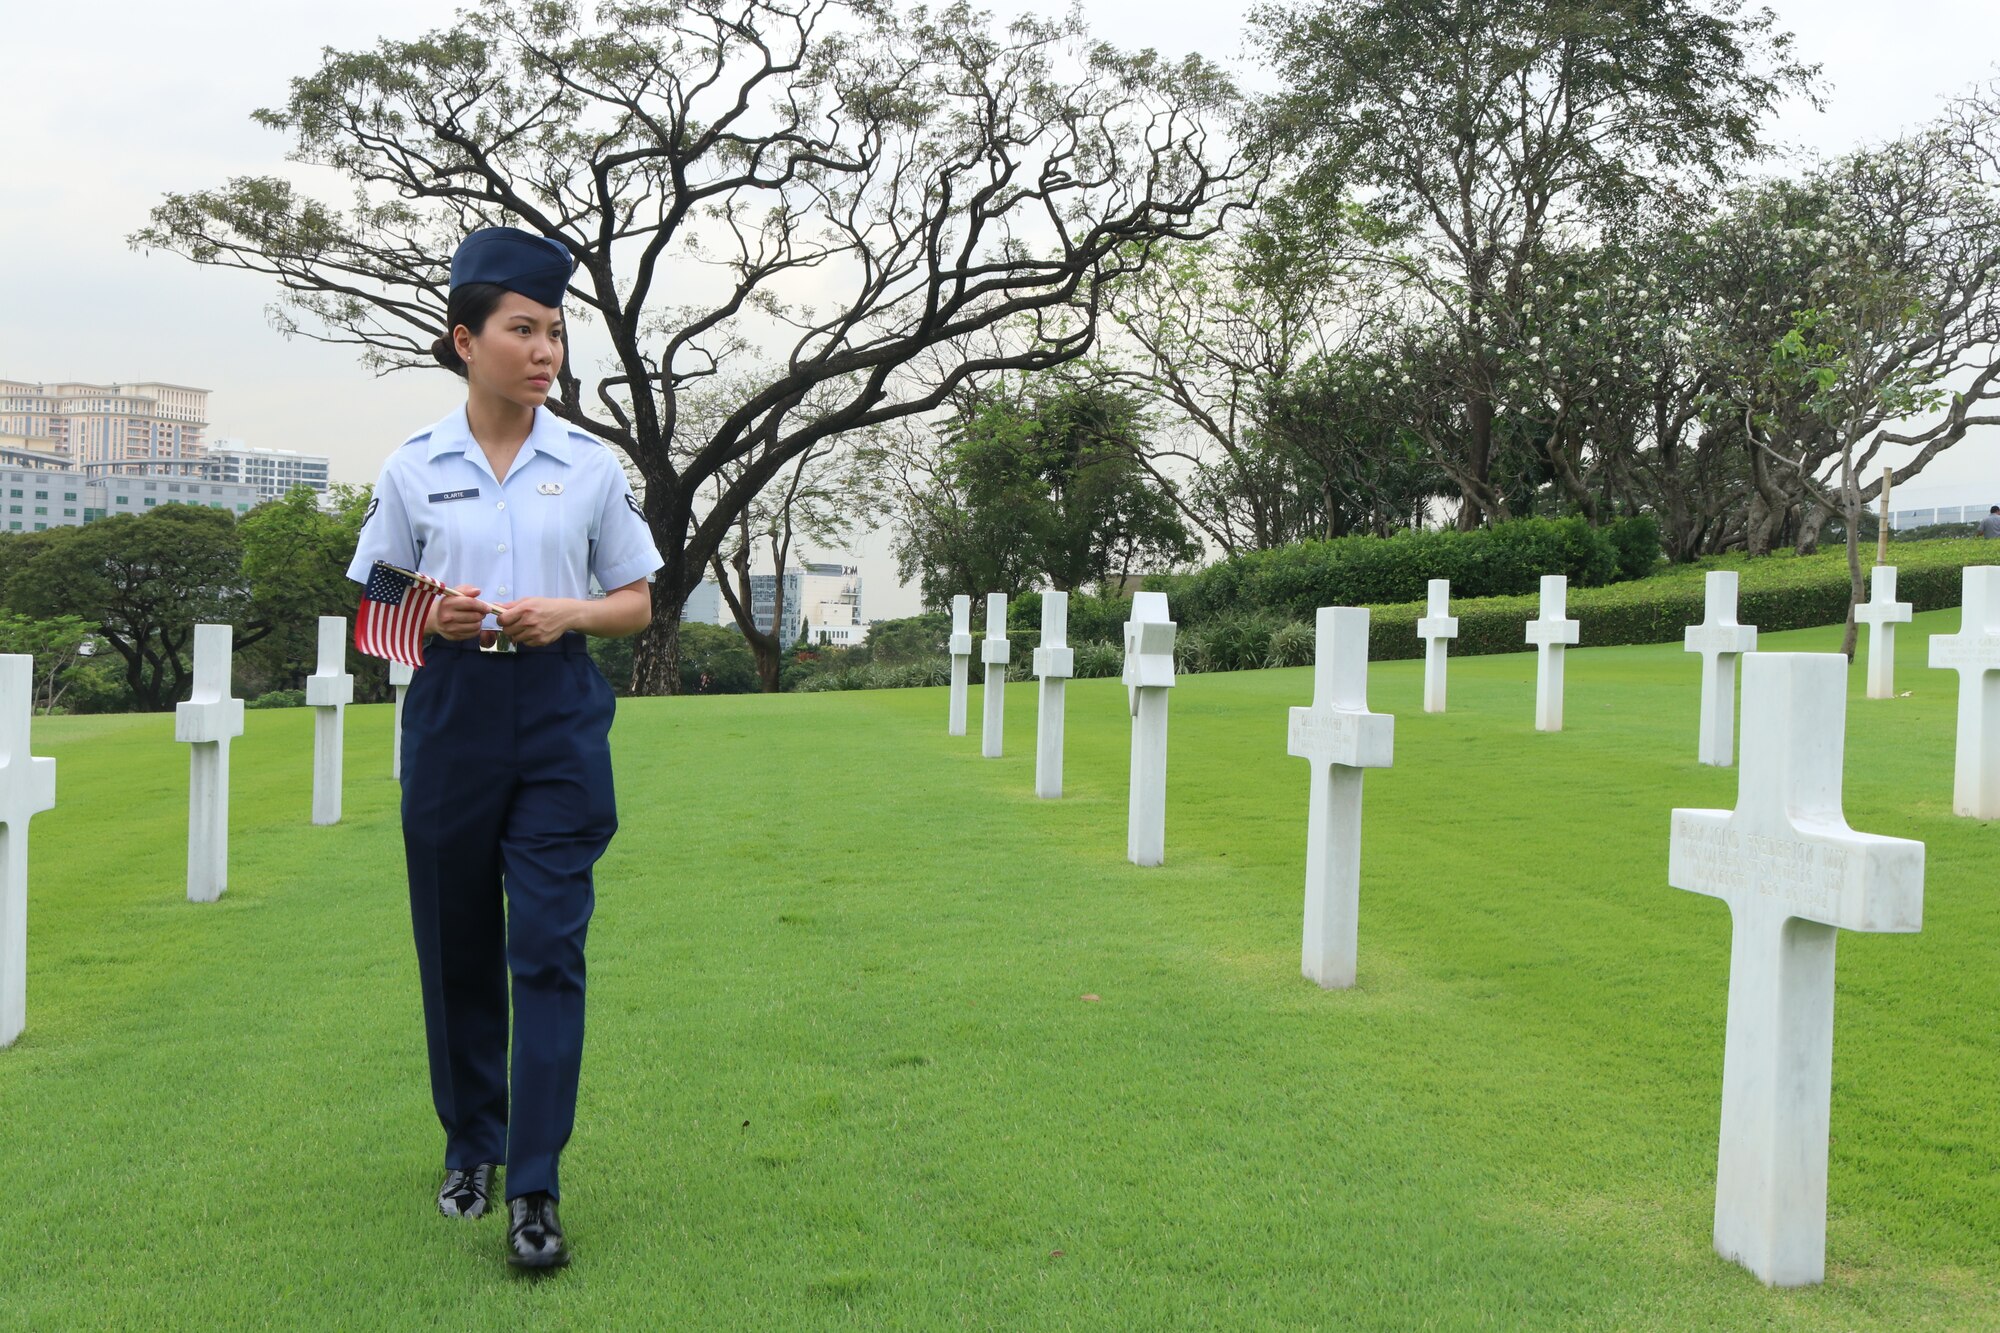 Airman 1st Class Ana Olarke, 317th Operations Support Squadron aircrew flight equipment journeyman, carries an American flag to place by a gravestone of a fallen service member of the 317th Airlift Wing at the Manila American Cemetery in Manila, Philippines, Feb. 17, 2020.